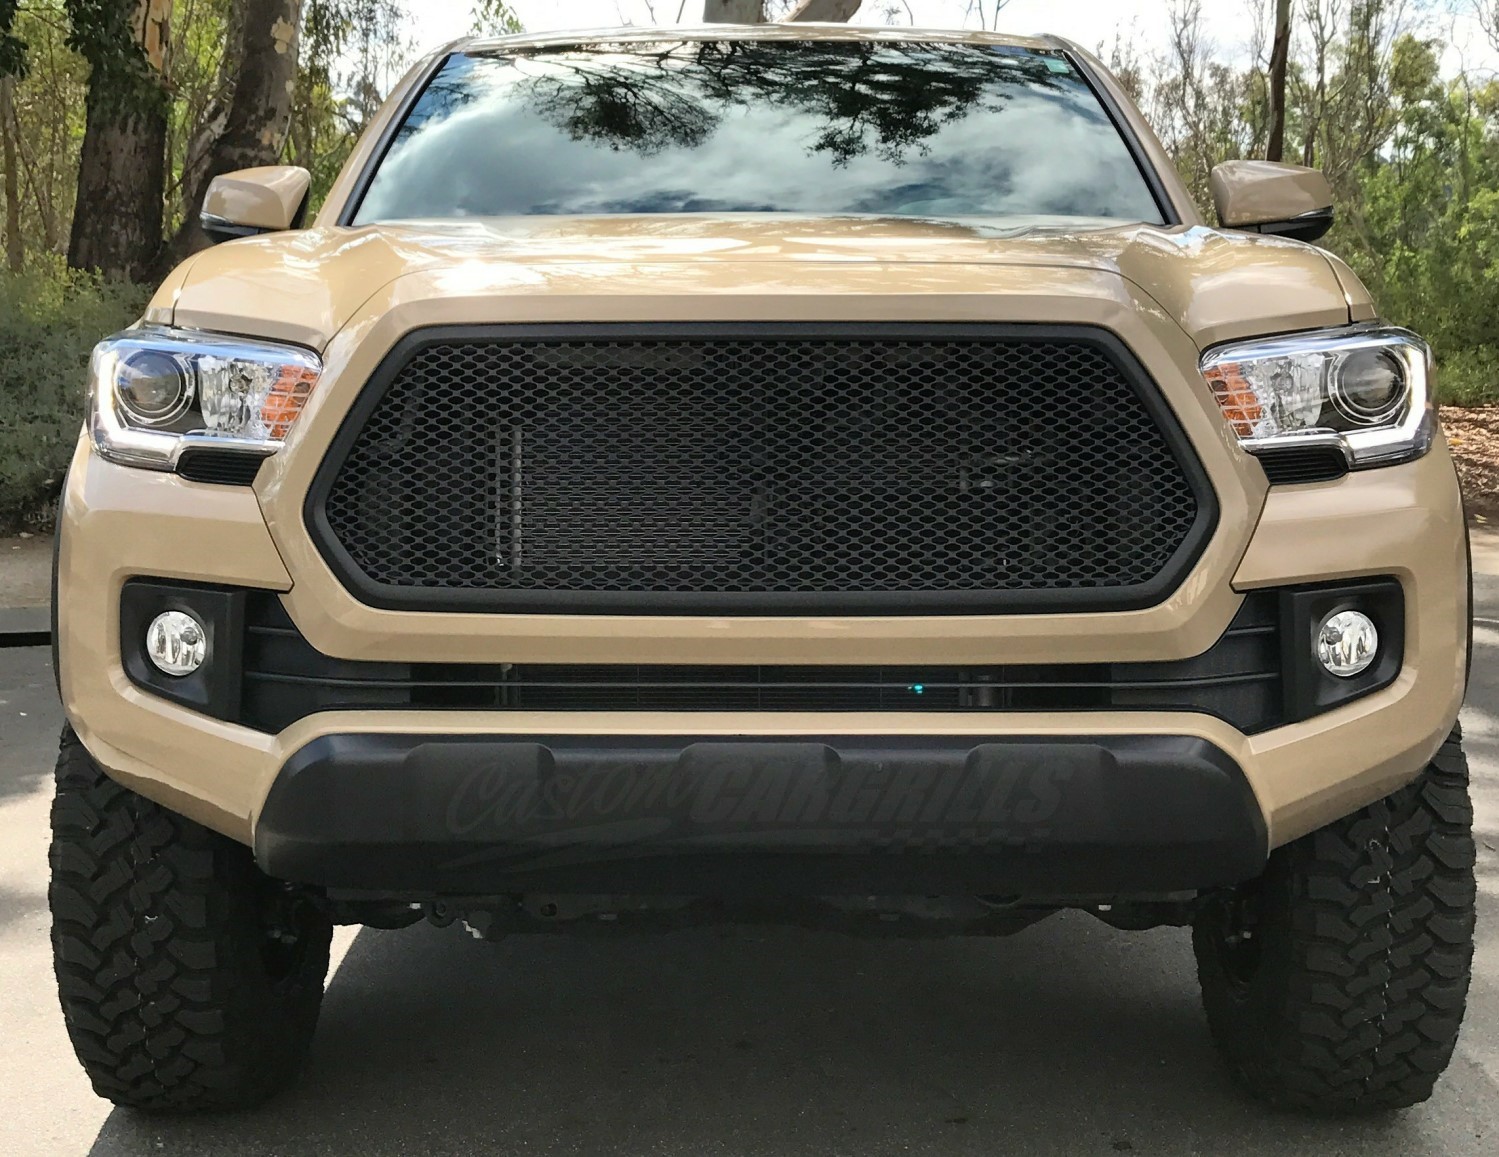 2016 2017 Toyota Tacoma Mesh Grill Bezels By Customcargrills